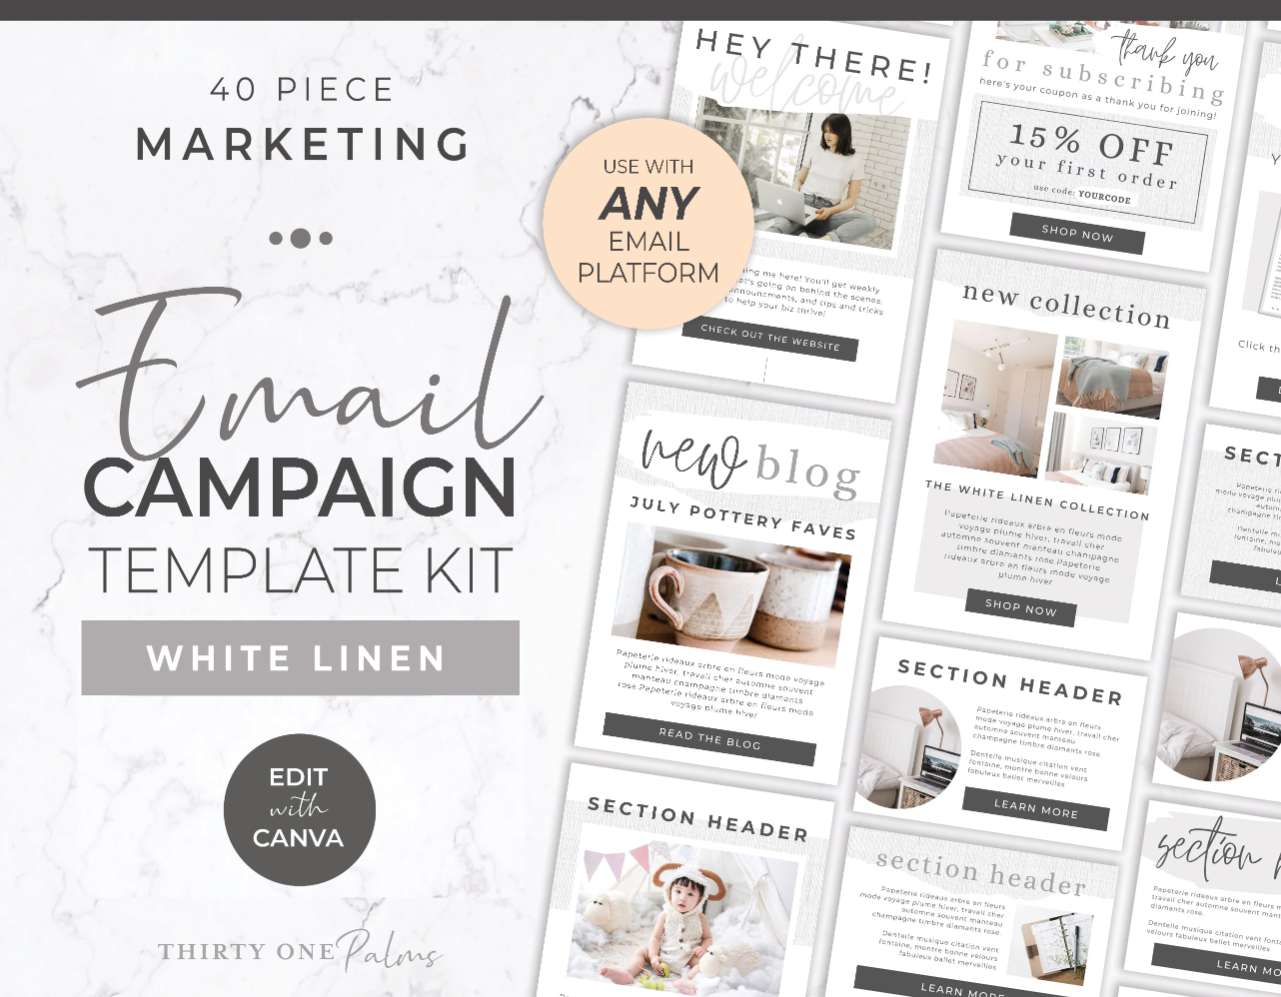 Email Marketing Campaign Template Kit - White Linen